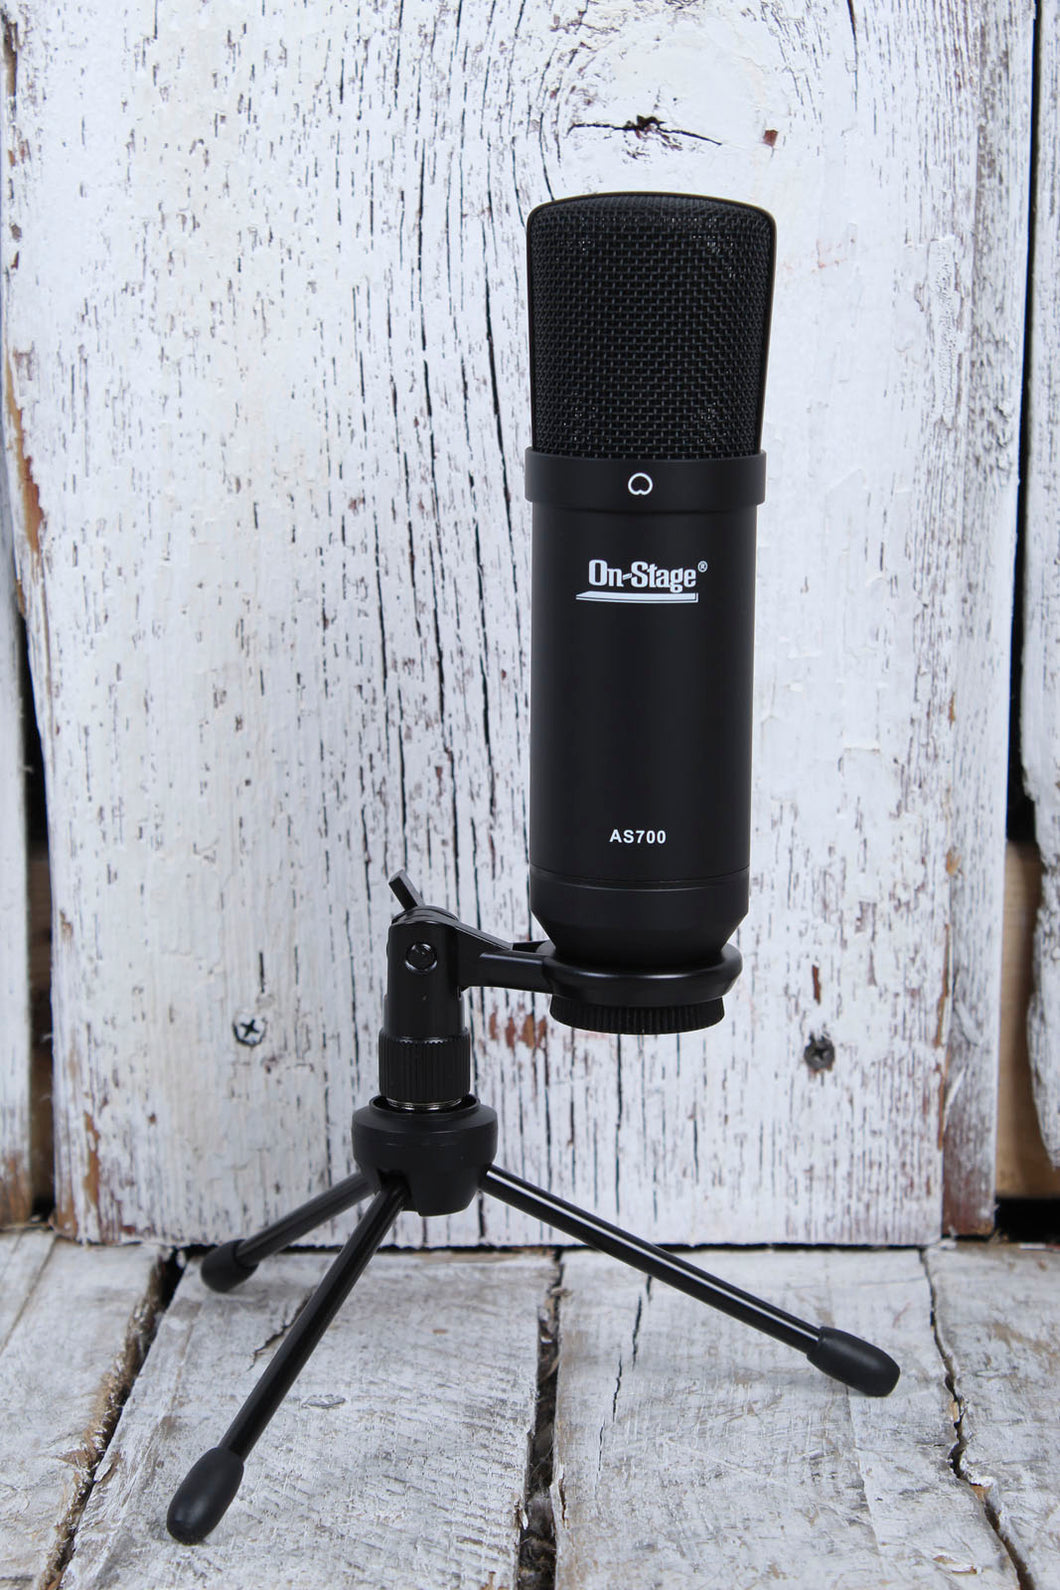 On-Stage AS700 USB Condenser Microphone Studio Quality USB Mic with Accessories